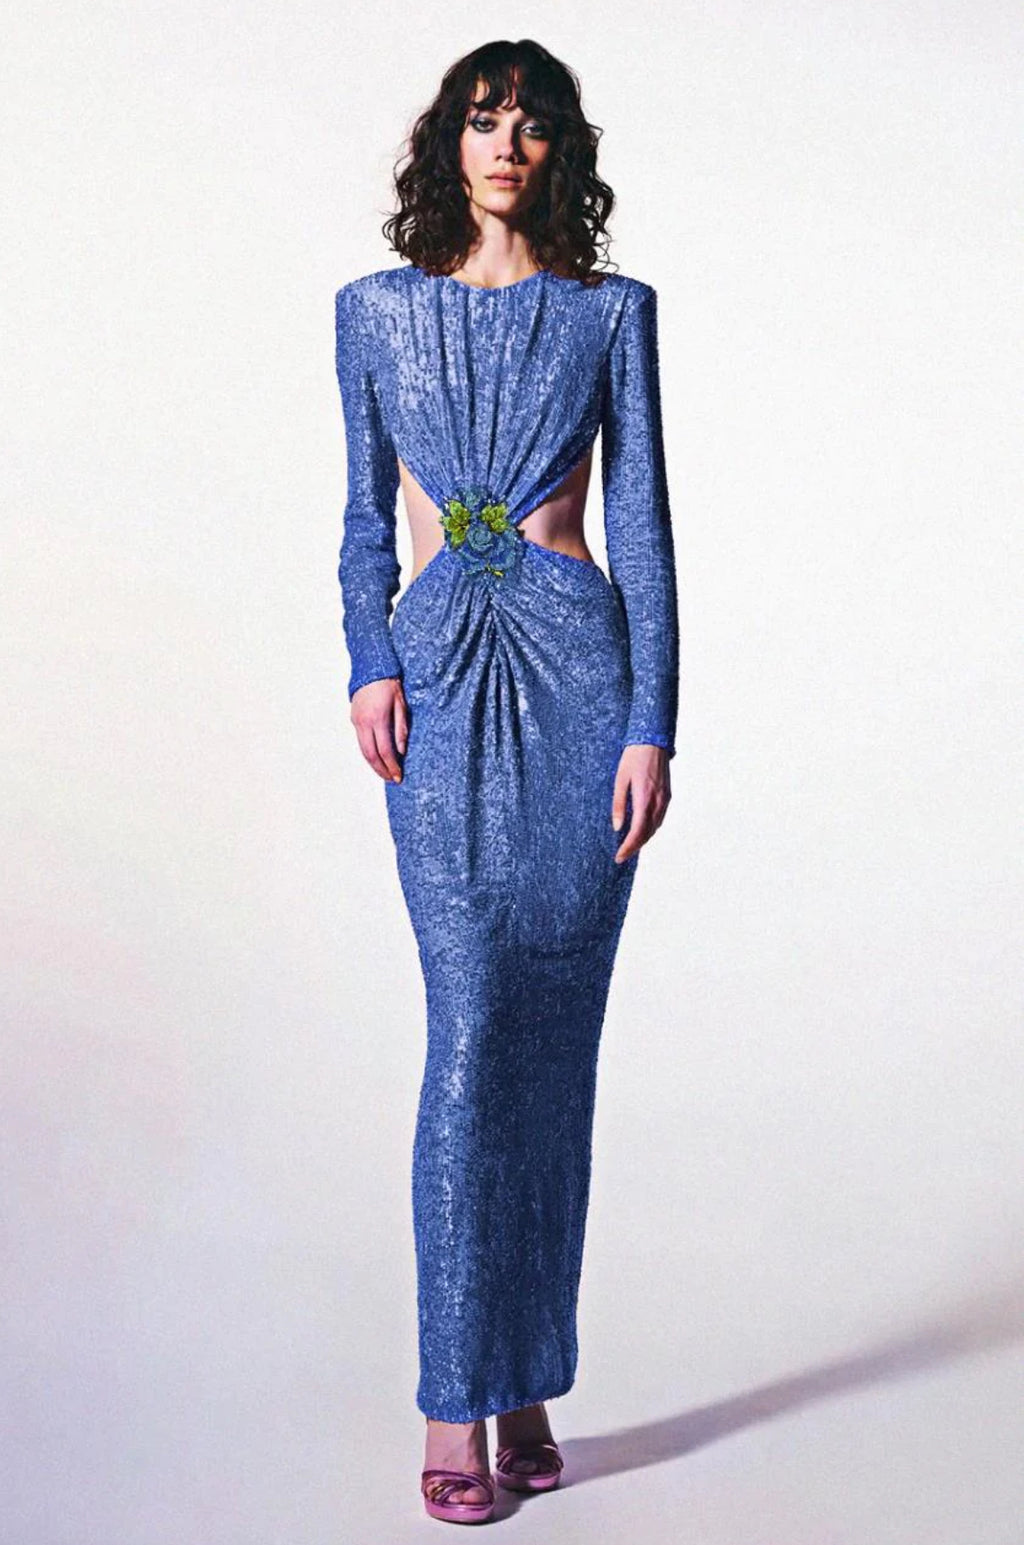 NEXT DAY DELIVERY SANDRA Sequins Long Sleeve Maxi Dress